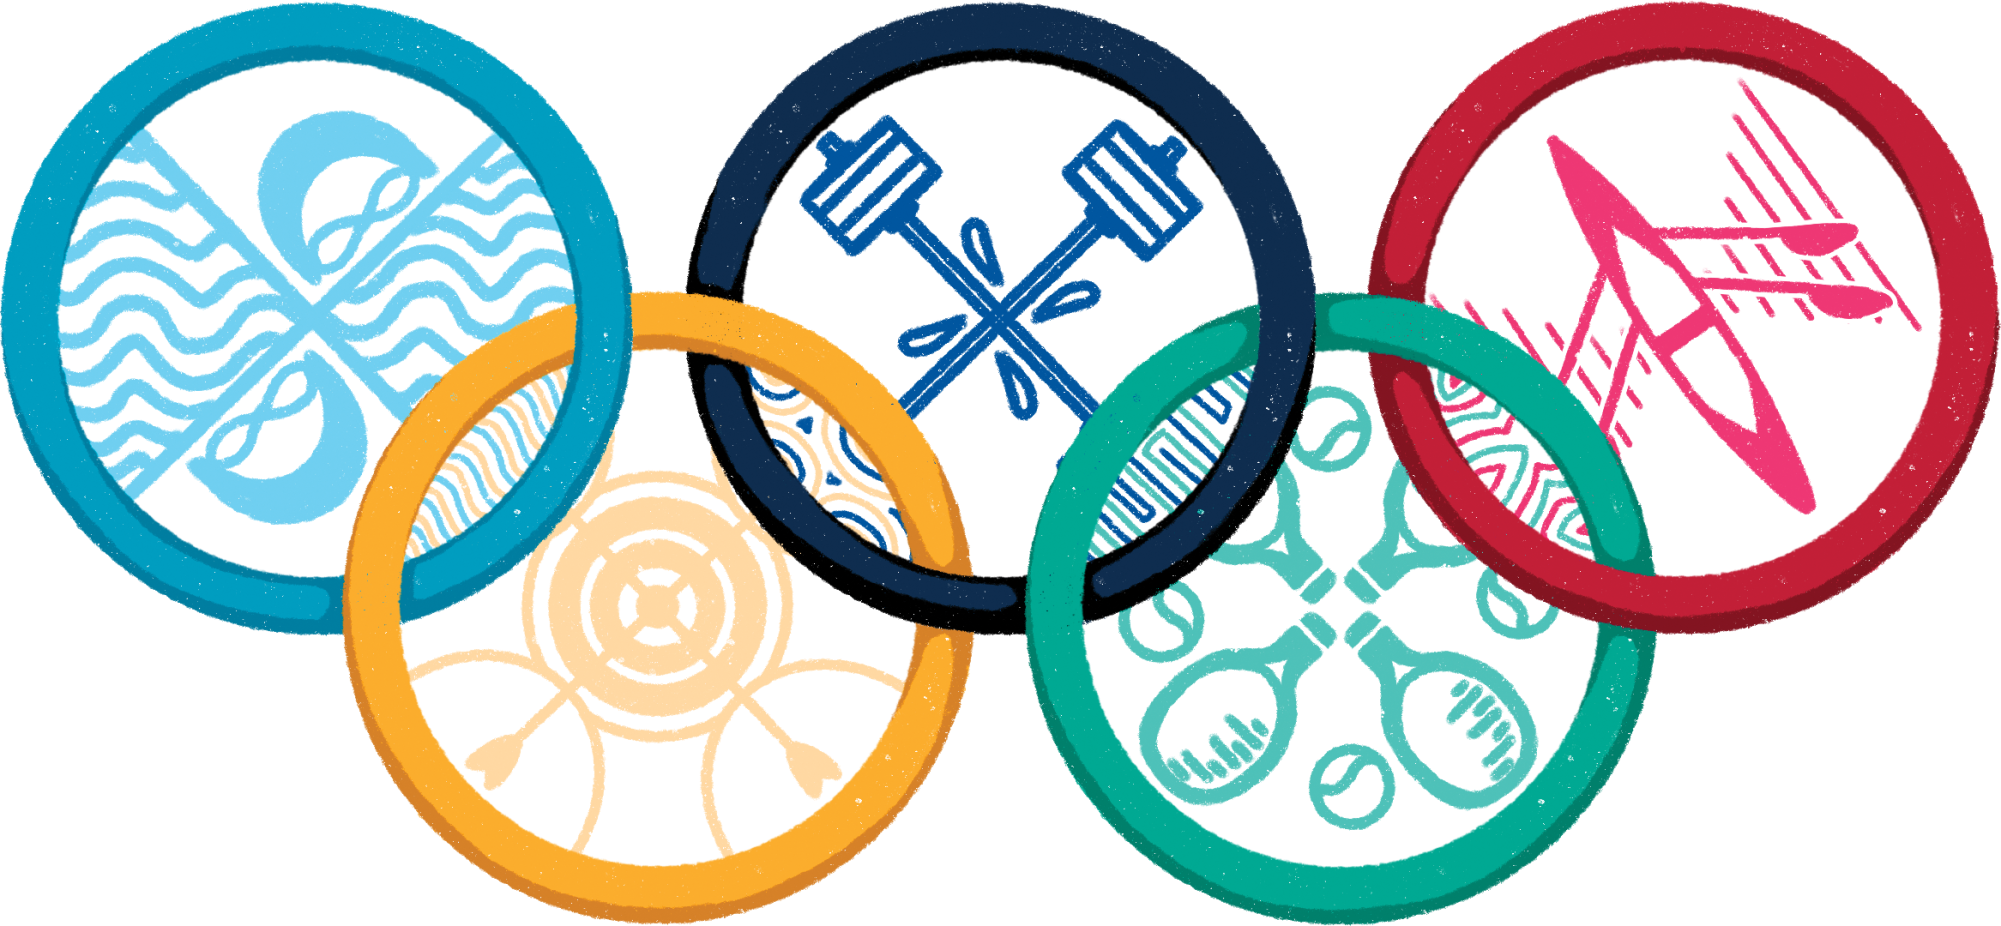 Olympic Rings In Heart Shape Hot-fix Rhinestone Transfer - Free Transparent  PNG Download - PNGkey